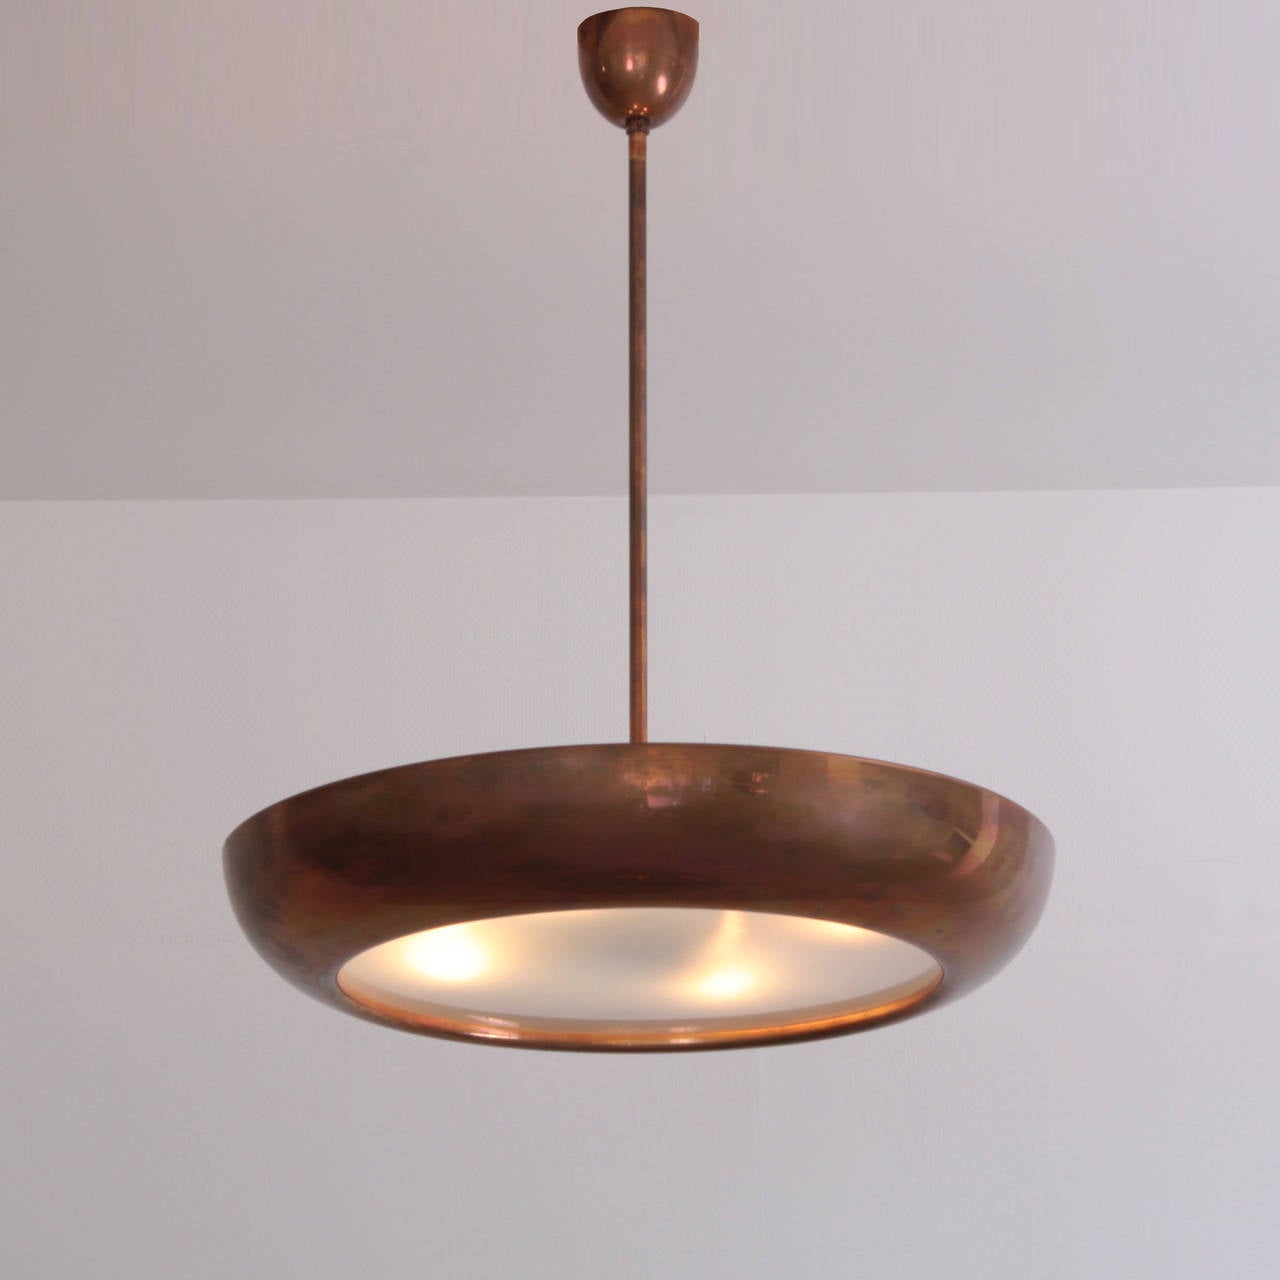 Rare, huge ceiling lamp from the 1940s. A satined glass plate is surrounded by a round brass or copper corpus. The lamp gives a very nice light and atmosphere.